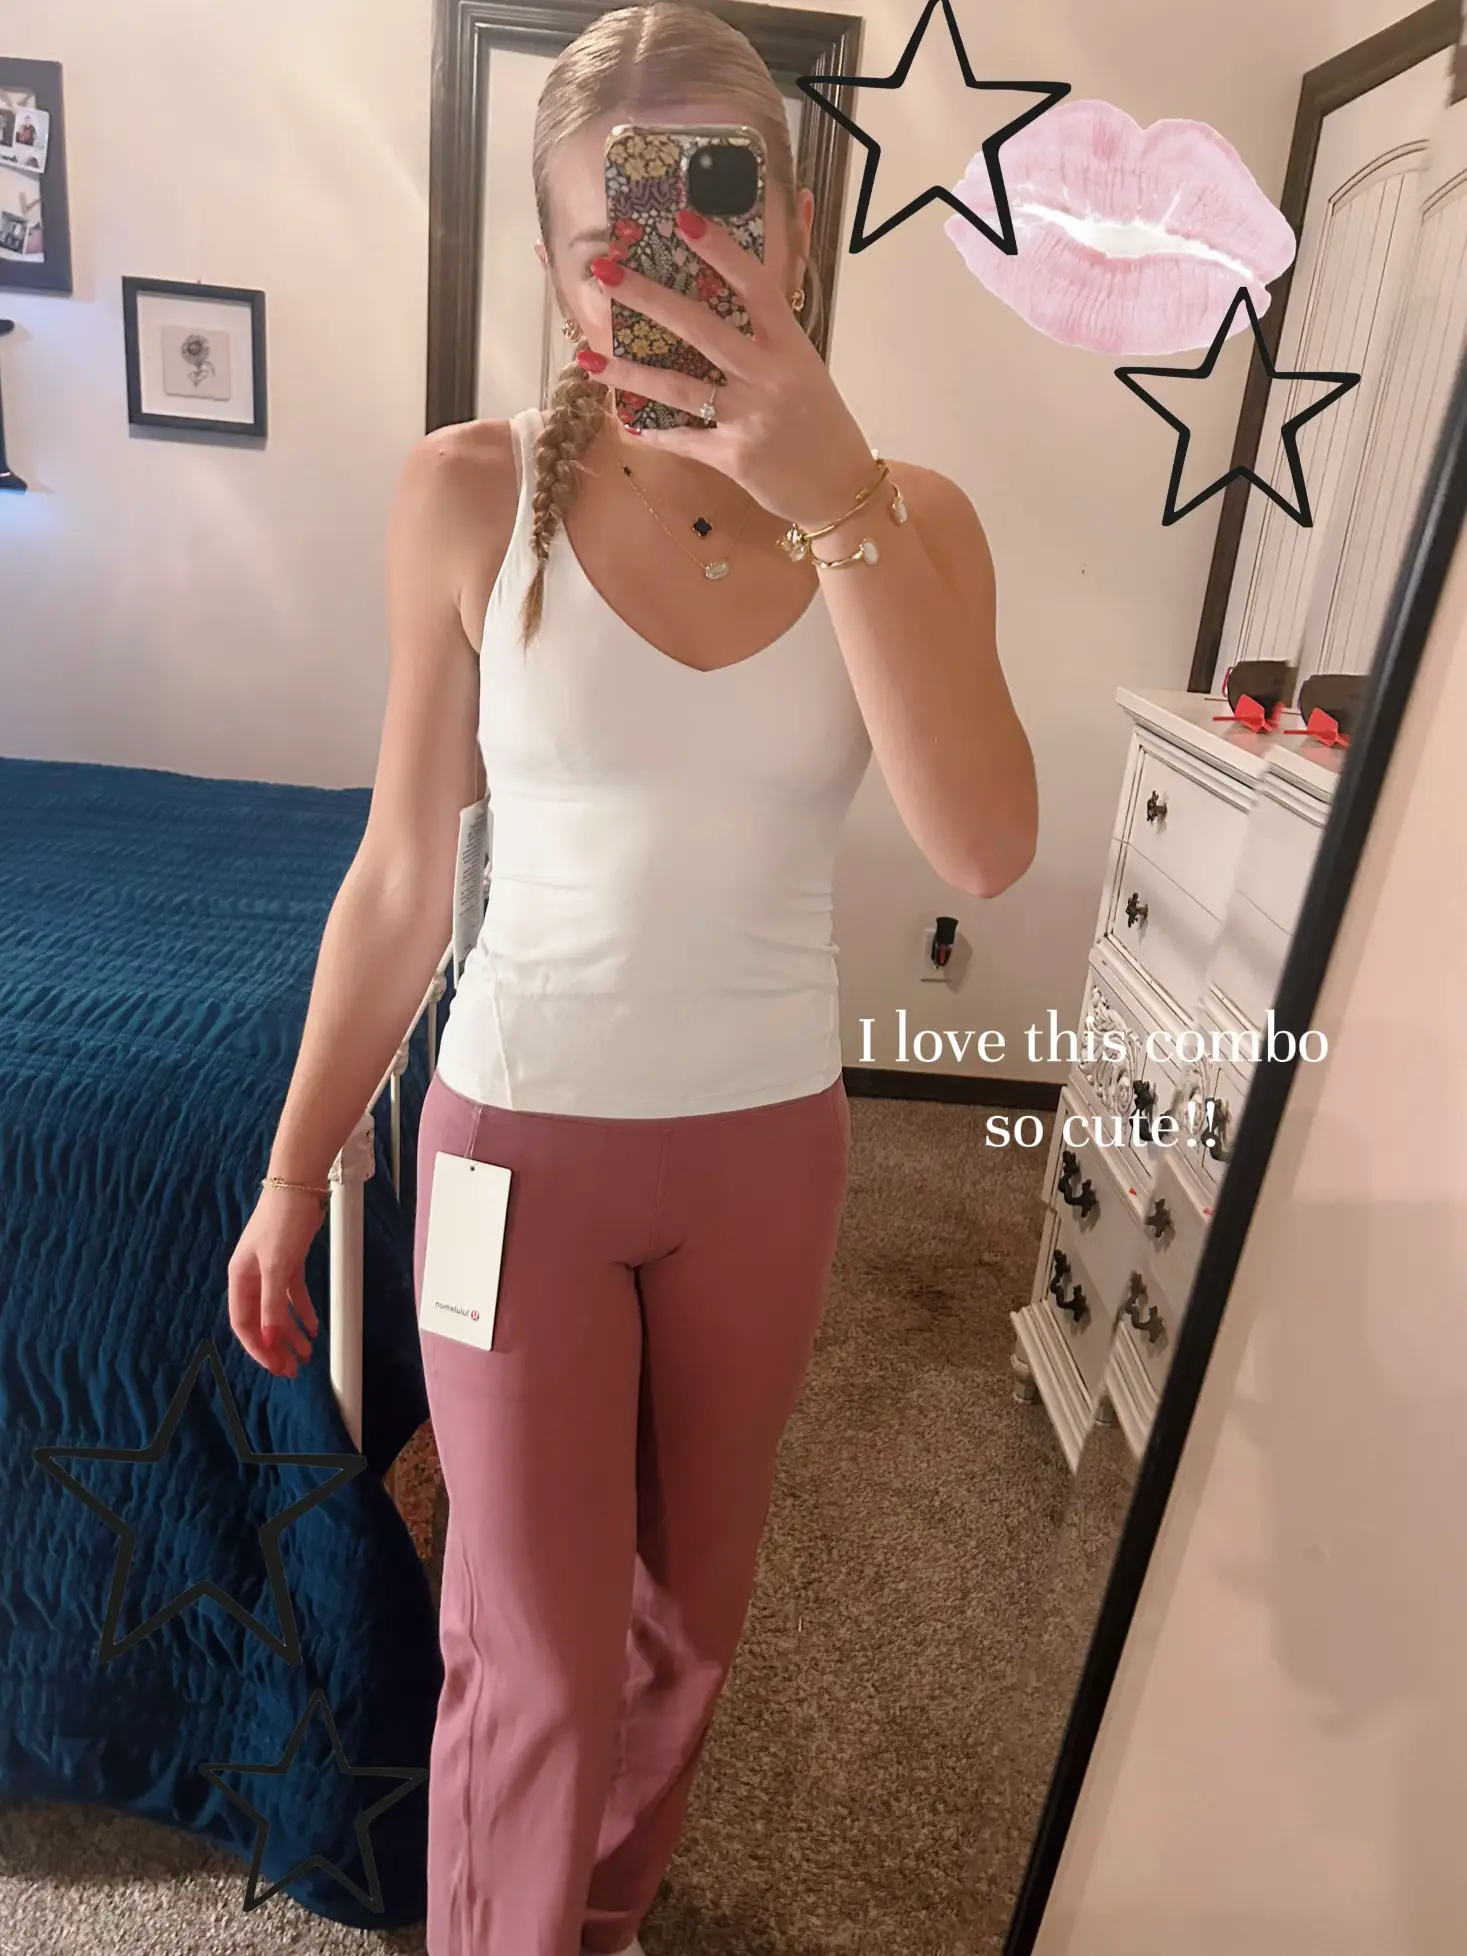 ad I just discovered these new wide-leg pants from @lululemon and can